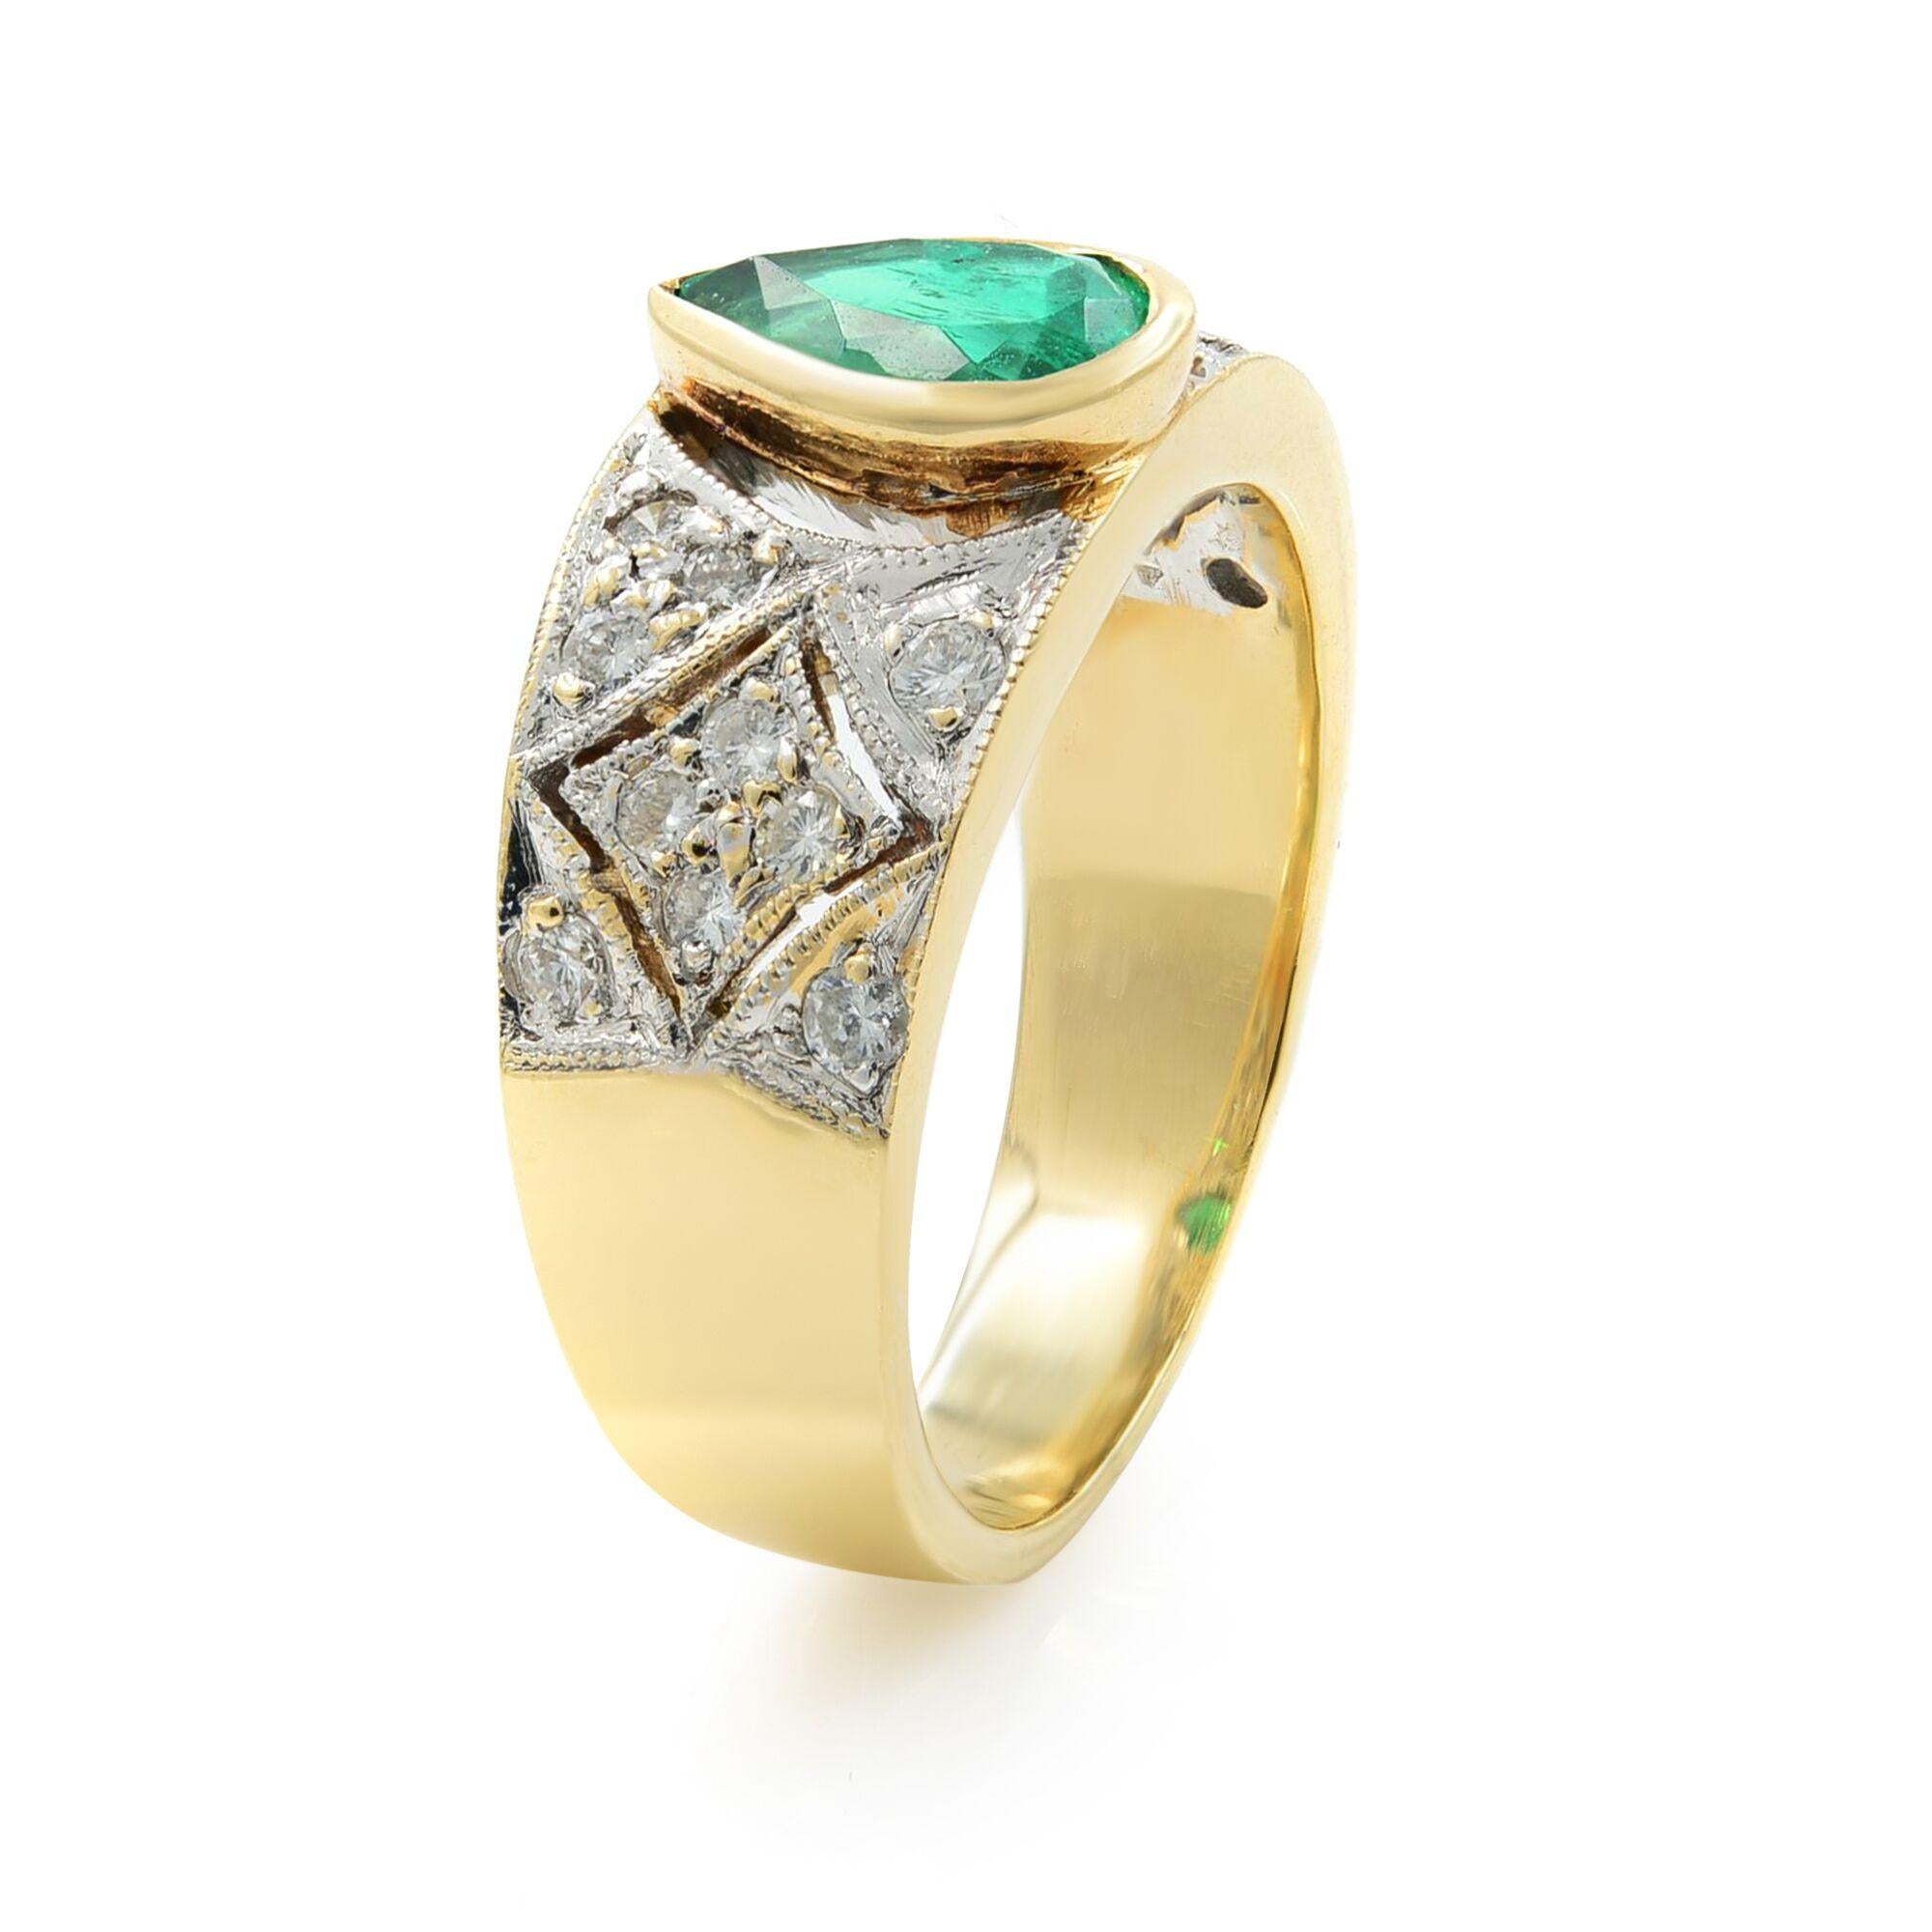 Absolutely gorgeous ladies green emerald and diamond band ring. The ring features one spectacular pear cut green emerald weighing 1.30 cttw as a center stone with bezel setting. Bright color stone ring with diamonds crafted in 14k yellow gold ring.